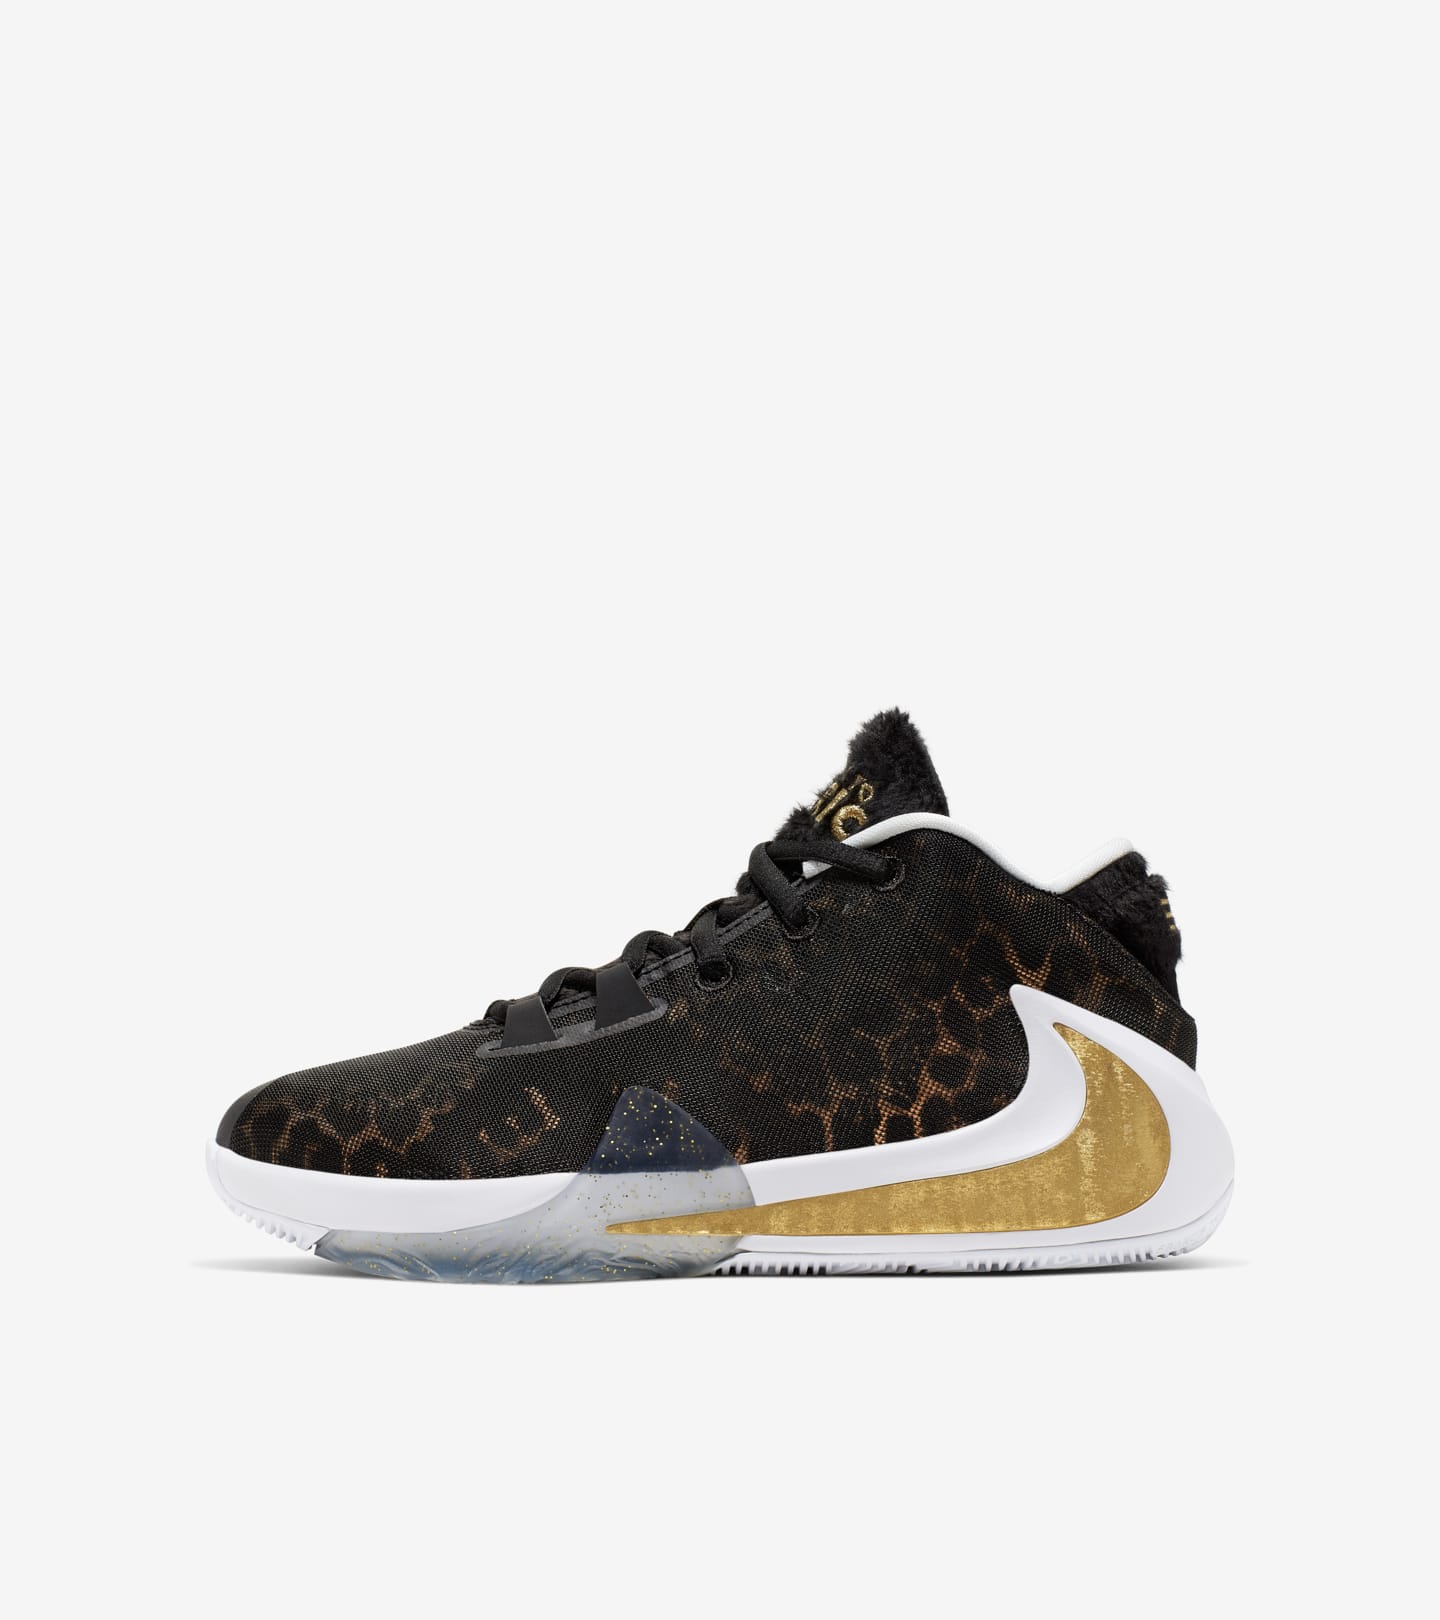 giannis coming to america shoes